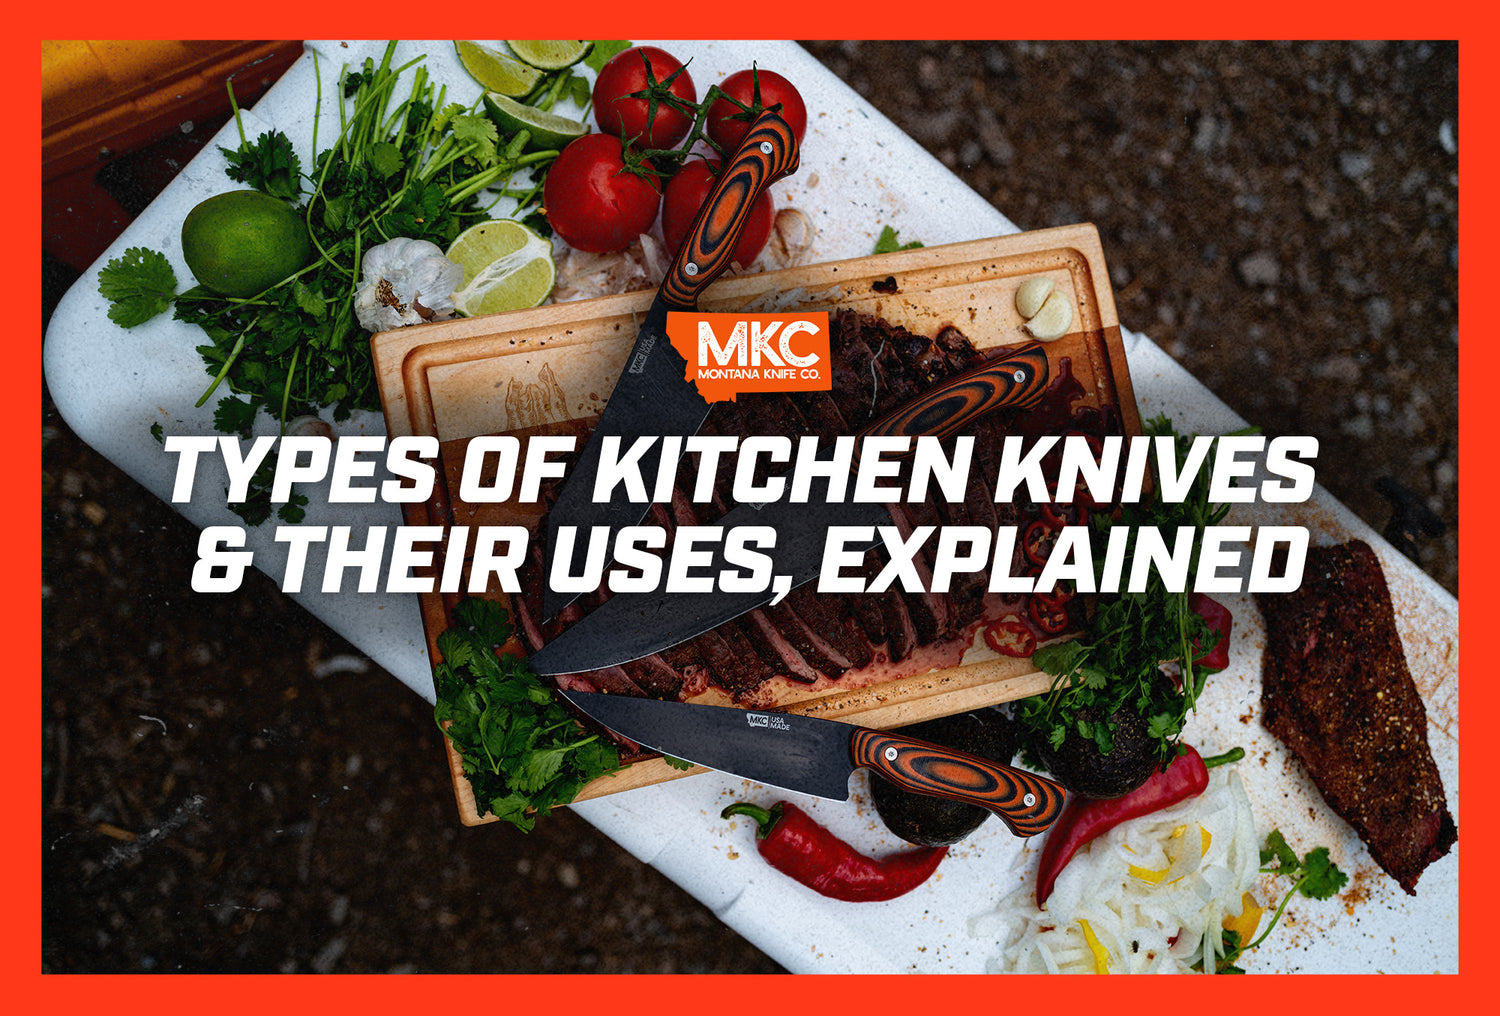 A white cutting board holds veggies, meat, a small wood cutting board, and three types of kitchen knives from MKC.